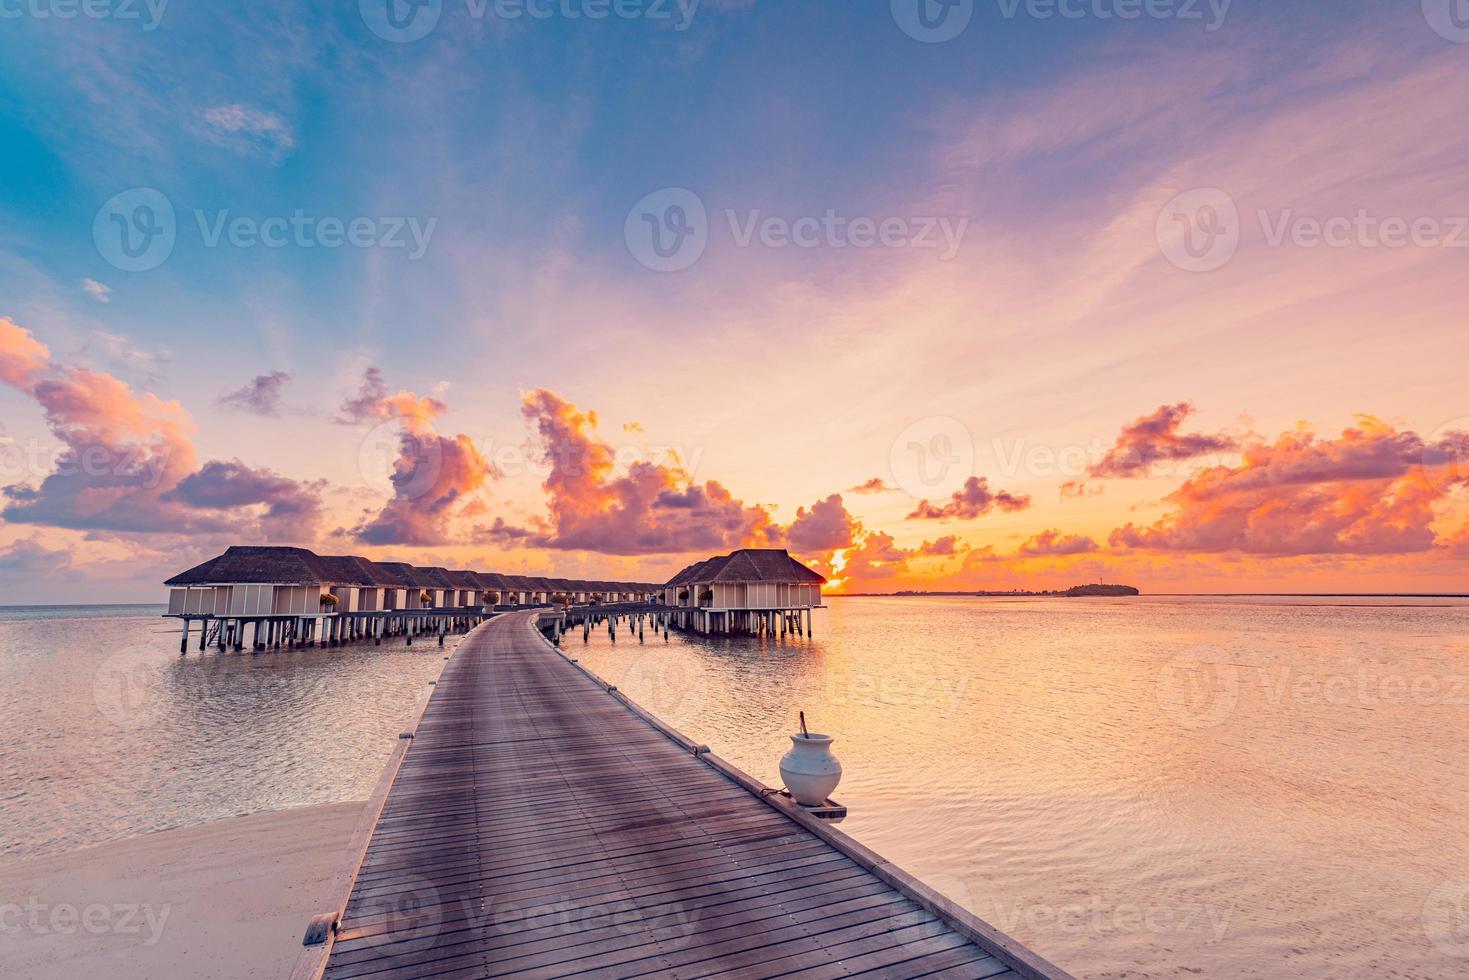 Amazing beach landscape. Beautiful Maldives sunset seascape view. Horizon colorful sea sky clouds, over water villa pier pathway. Tranquil island lagoon, tourism travel background. Exotic vacation photo